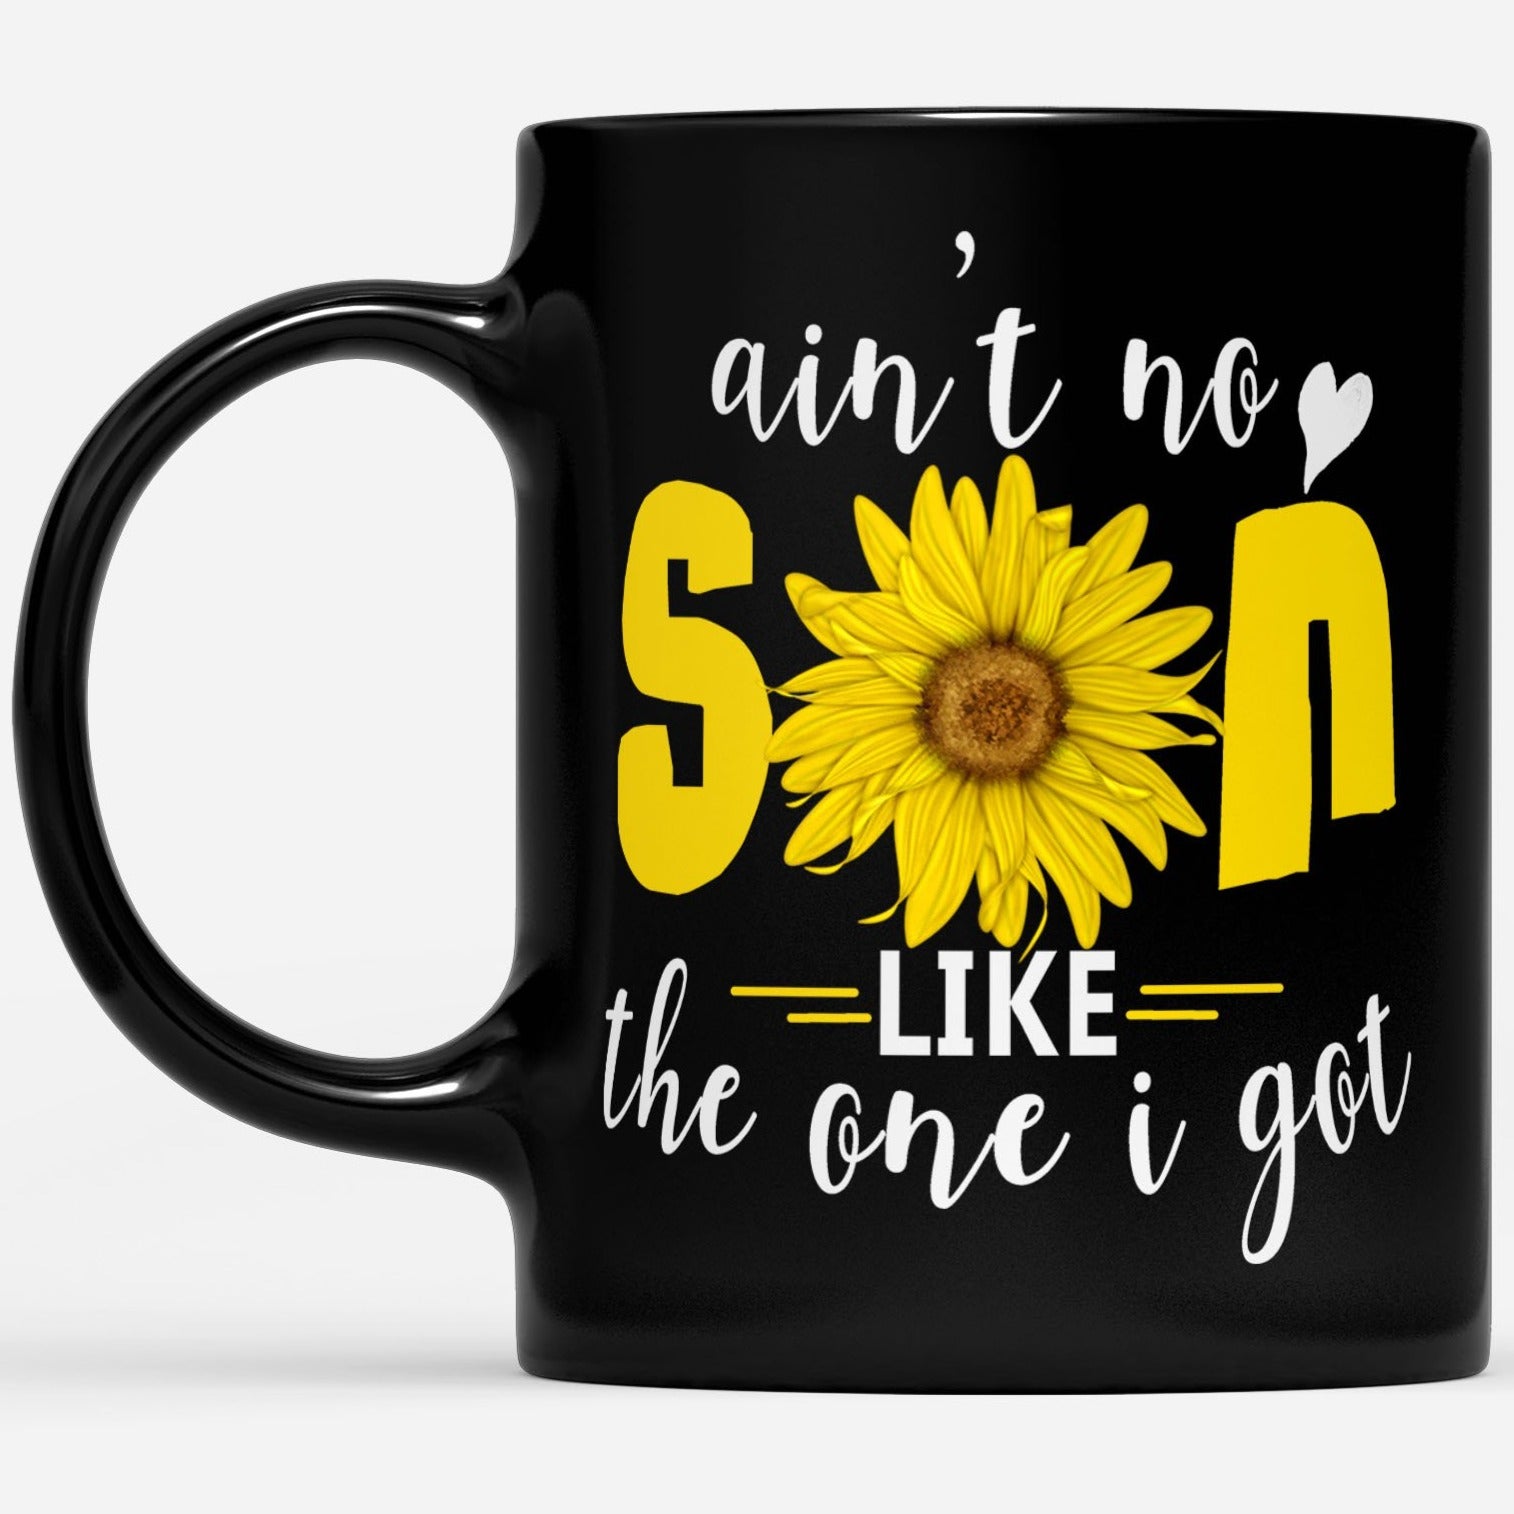 Aint No Son Like The One I Got Sunflower Design Gift Ideas For Son And Boys W DS Black Mug